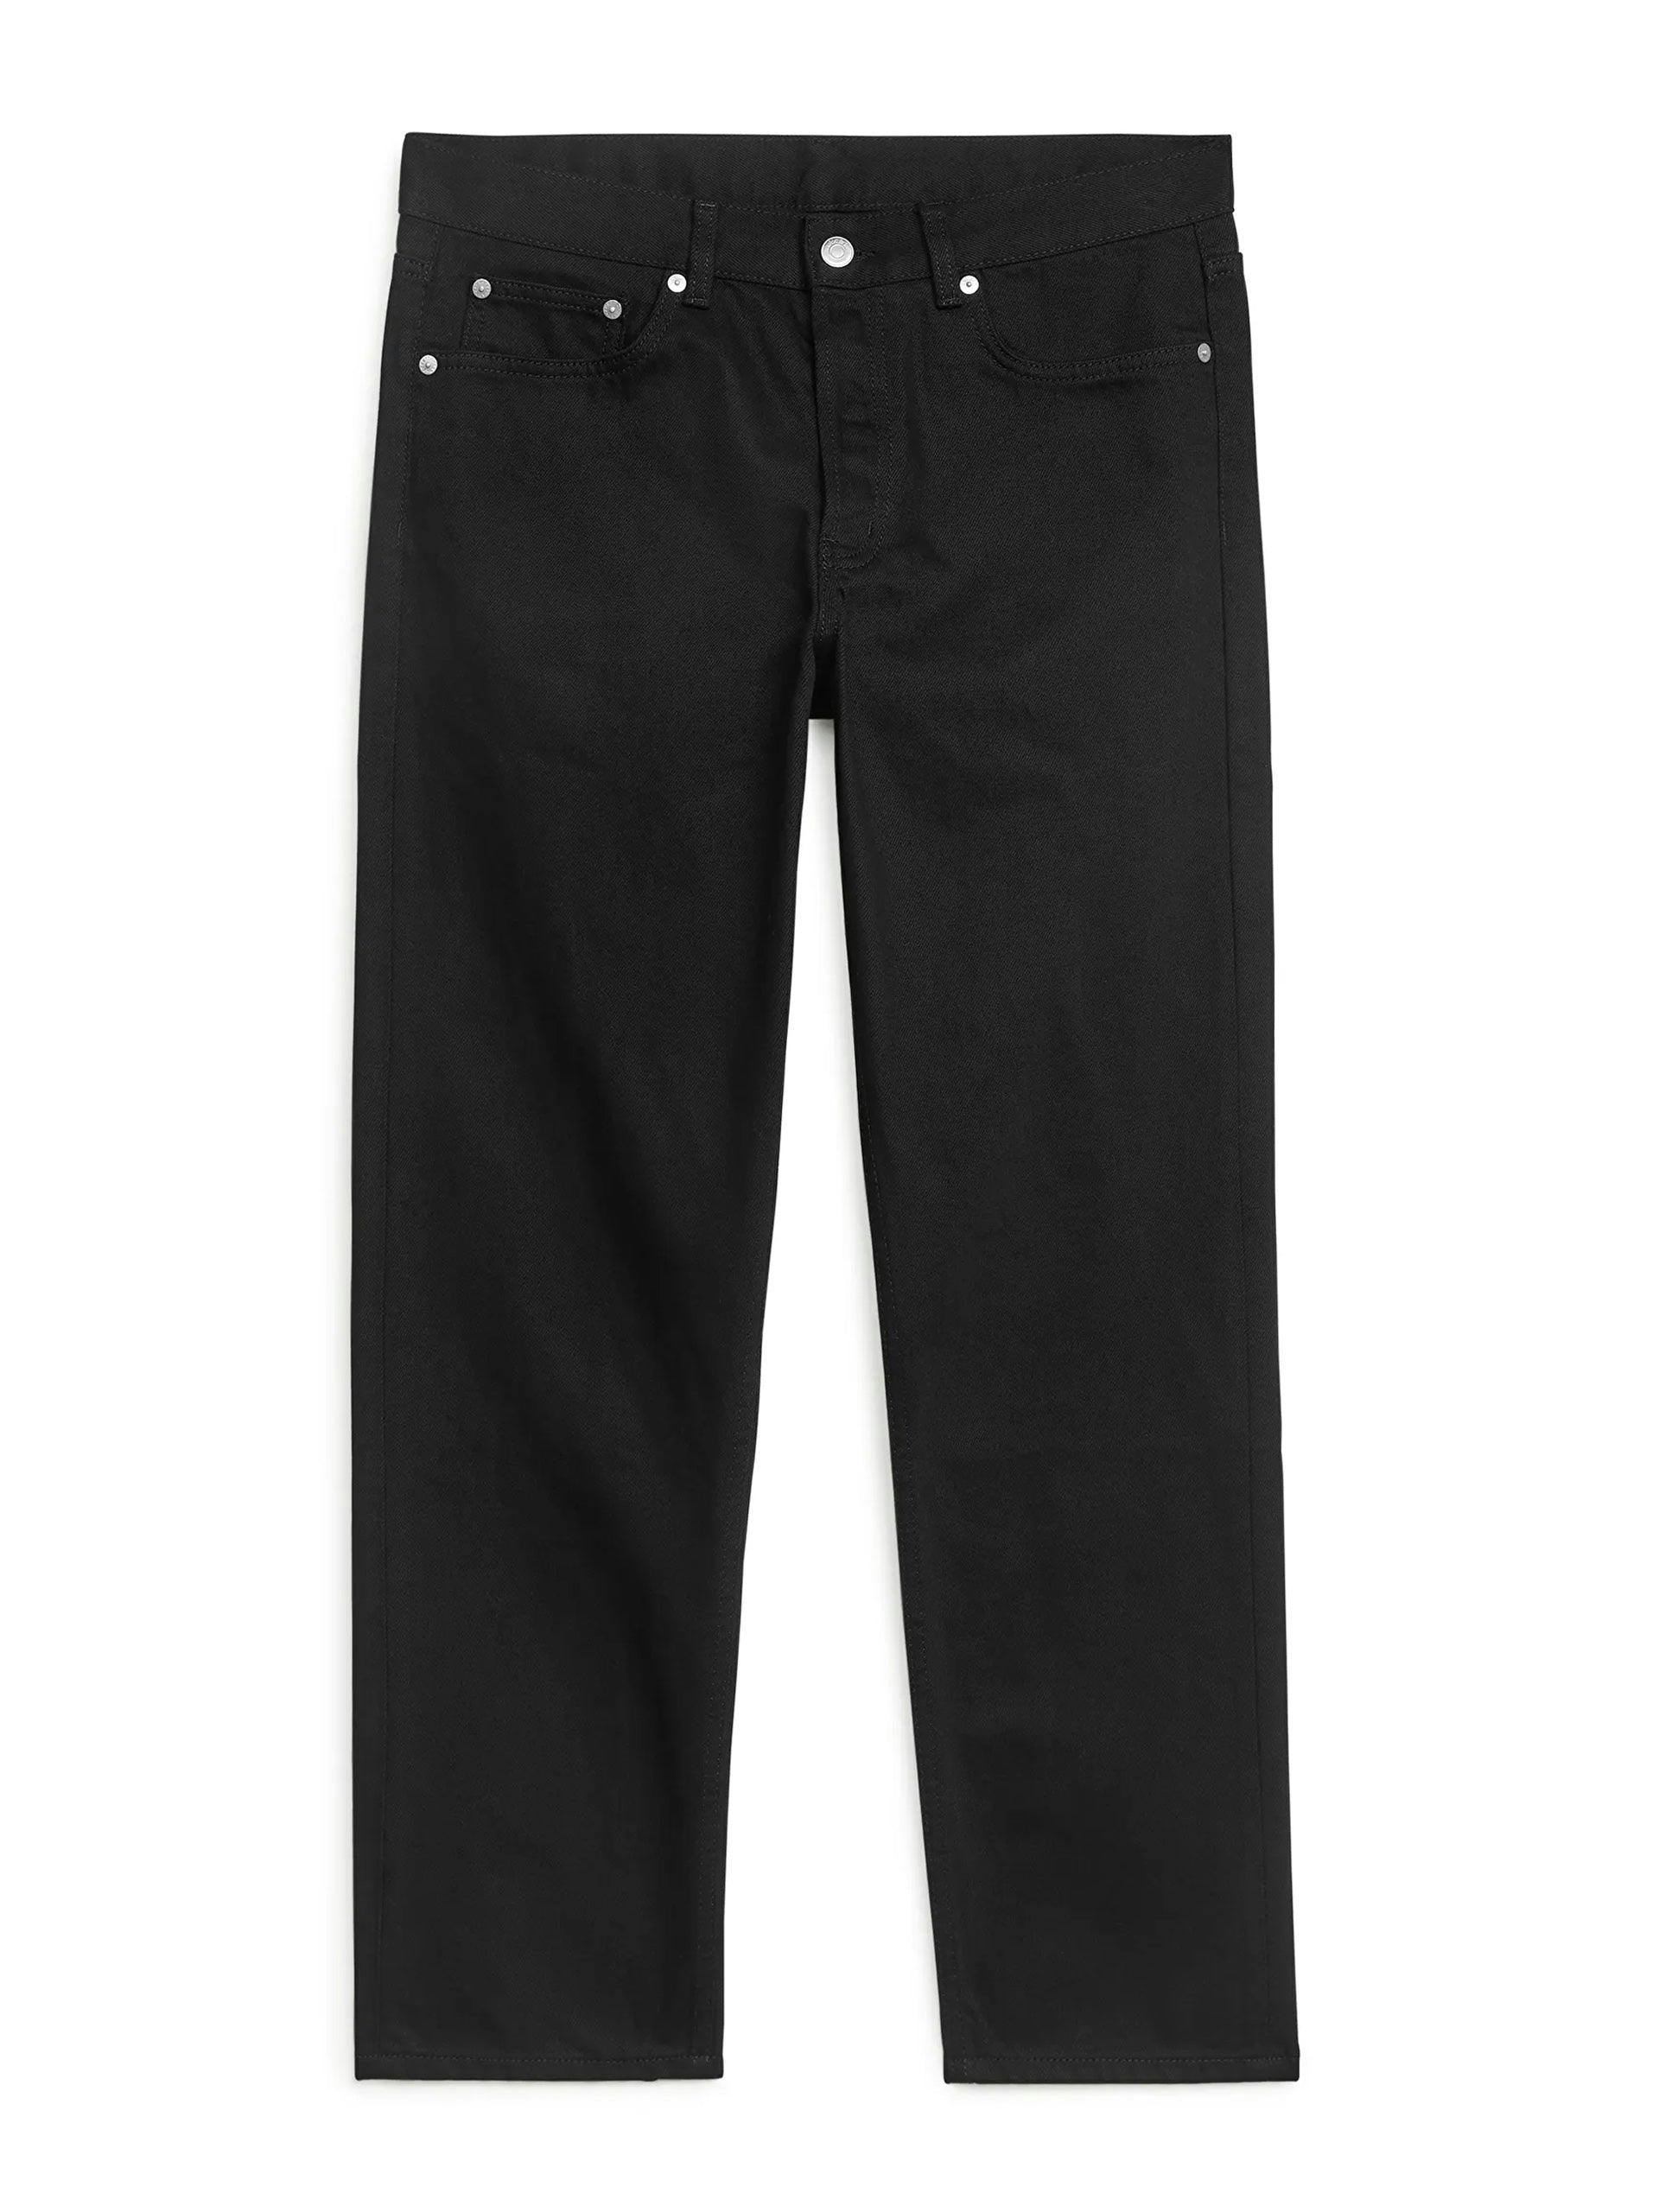 Black cropped straight jeans